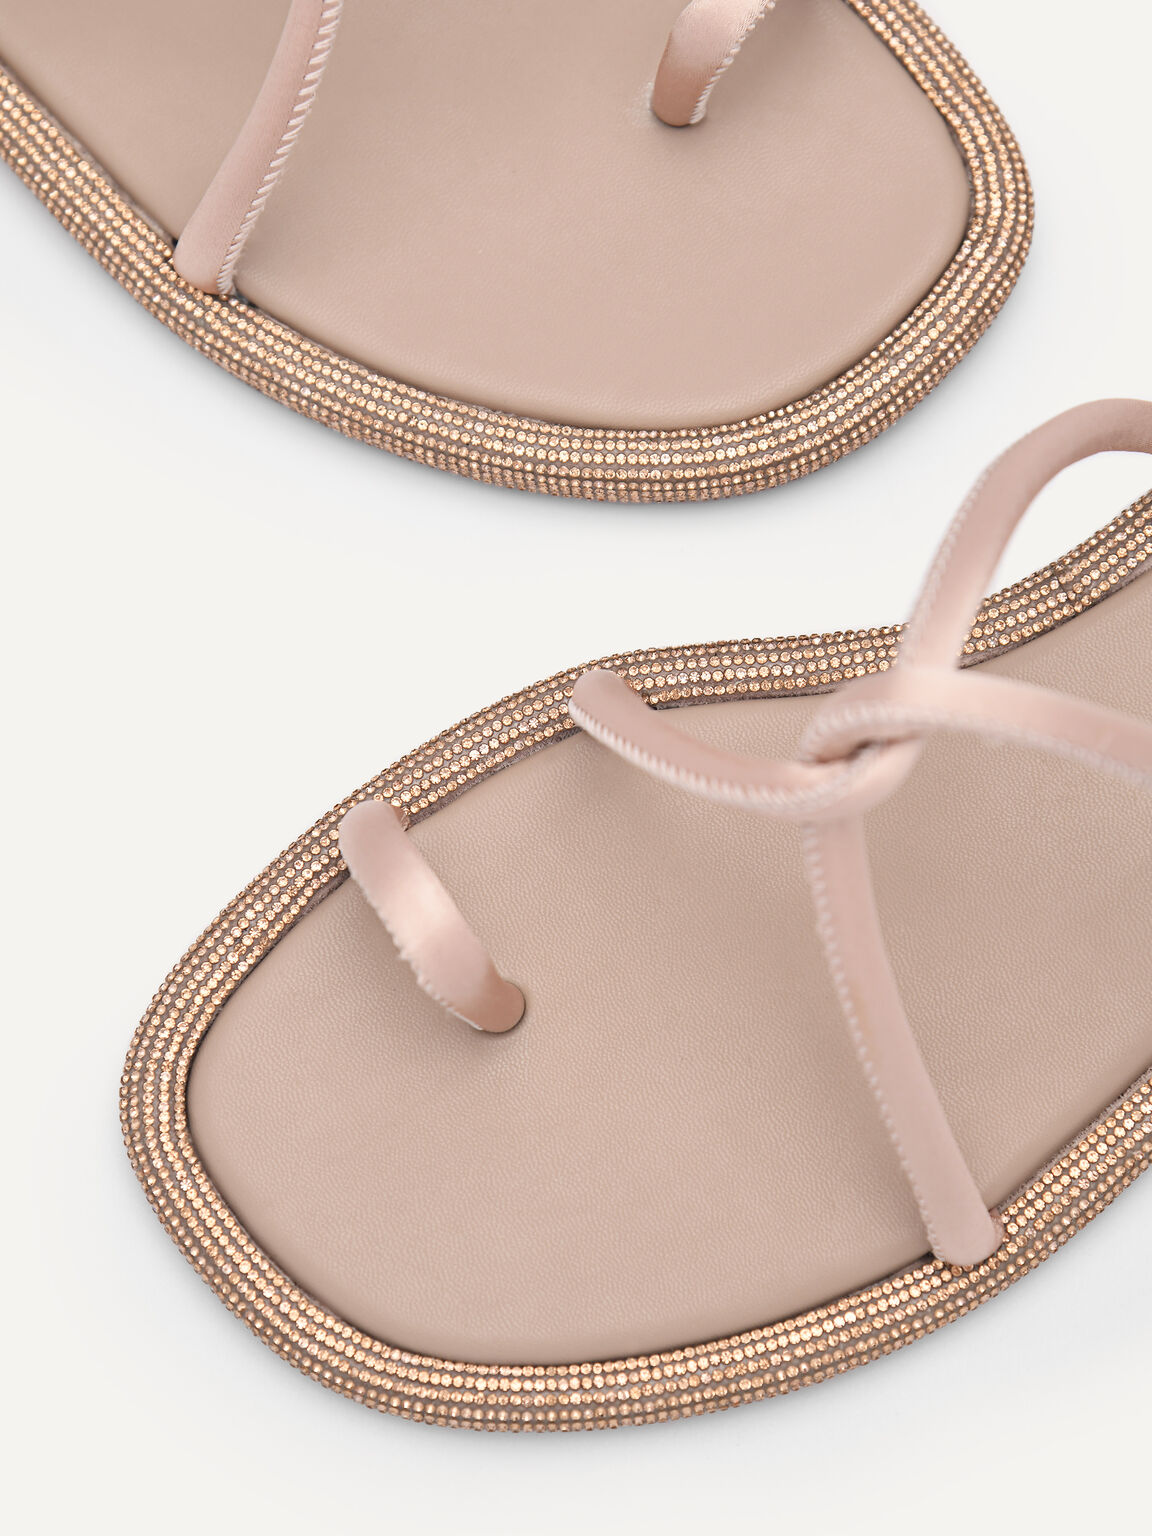 Rina Strappy Sandals, Nude